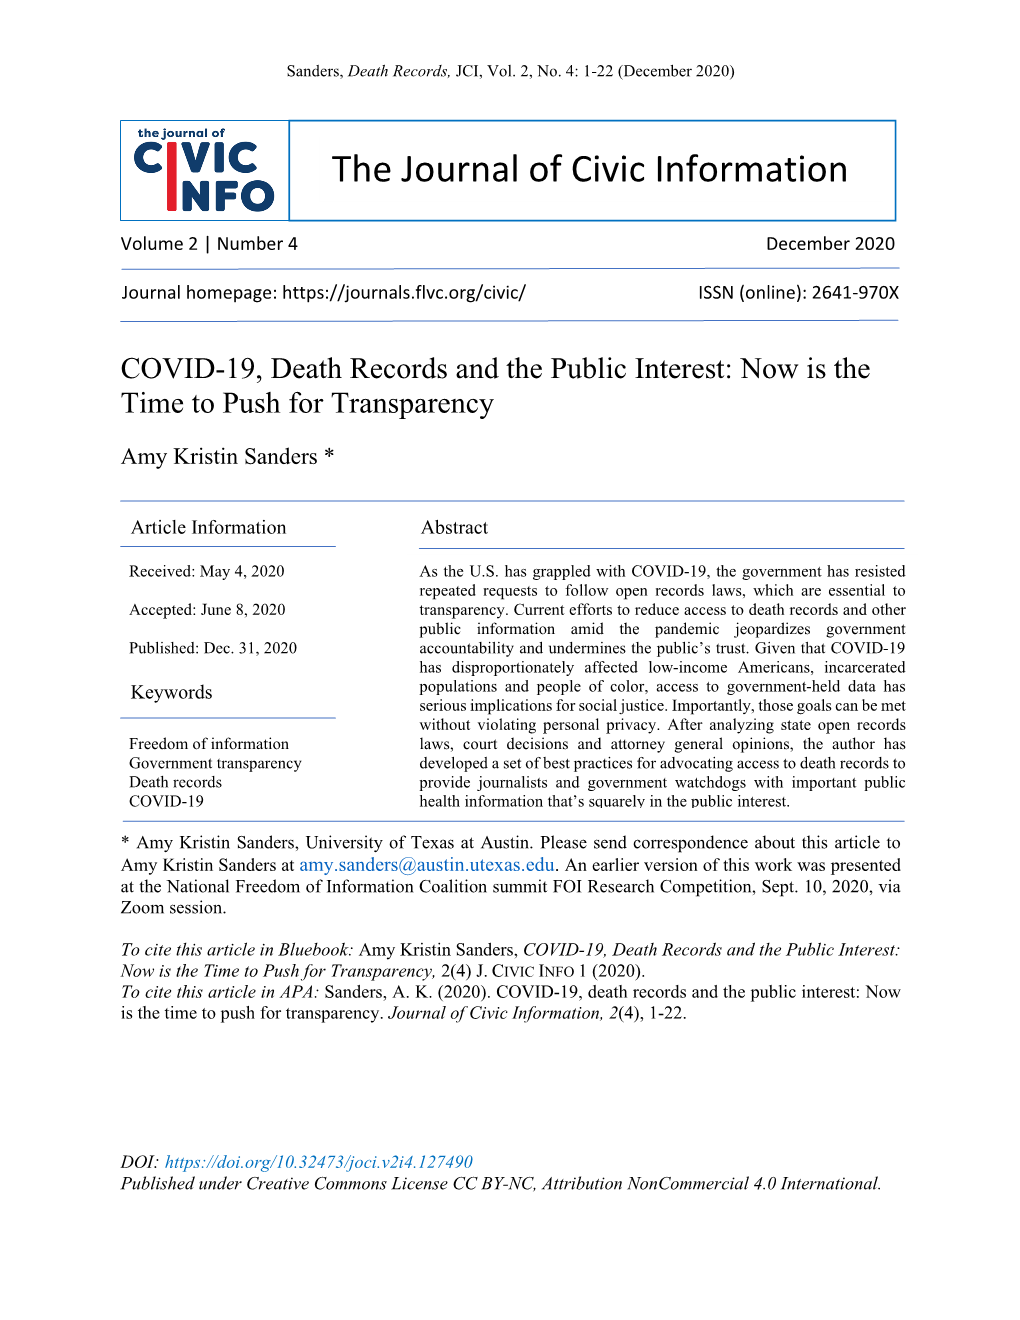 The Journal of Civic Information